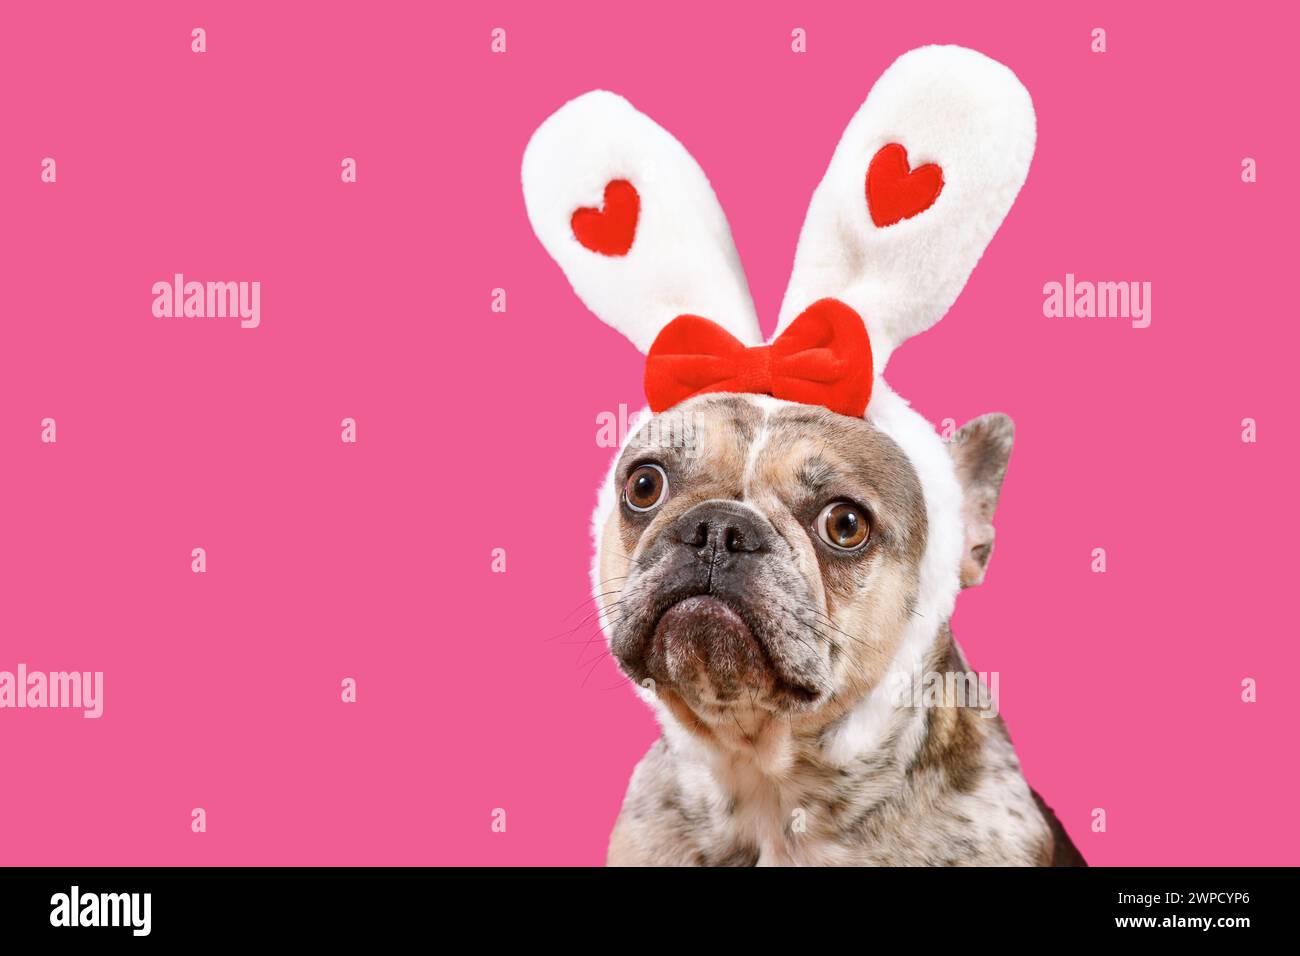 Funny merle French Bulldog dog wearing Easter bunny ear headband with hearts on pink background with copy space Stock Photo